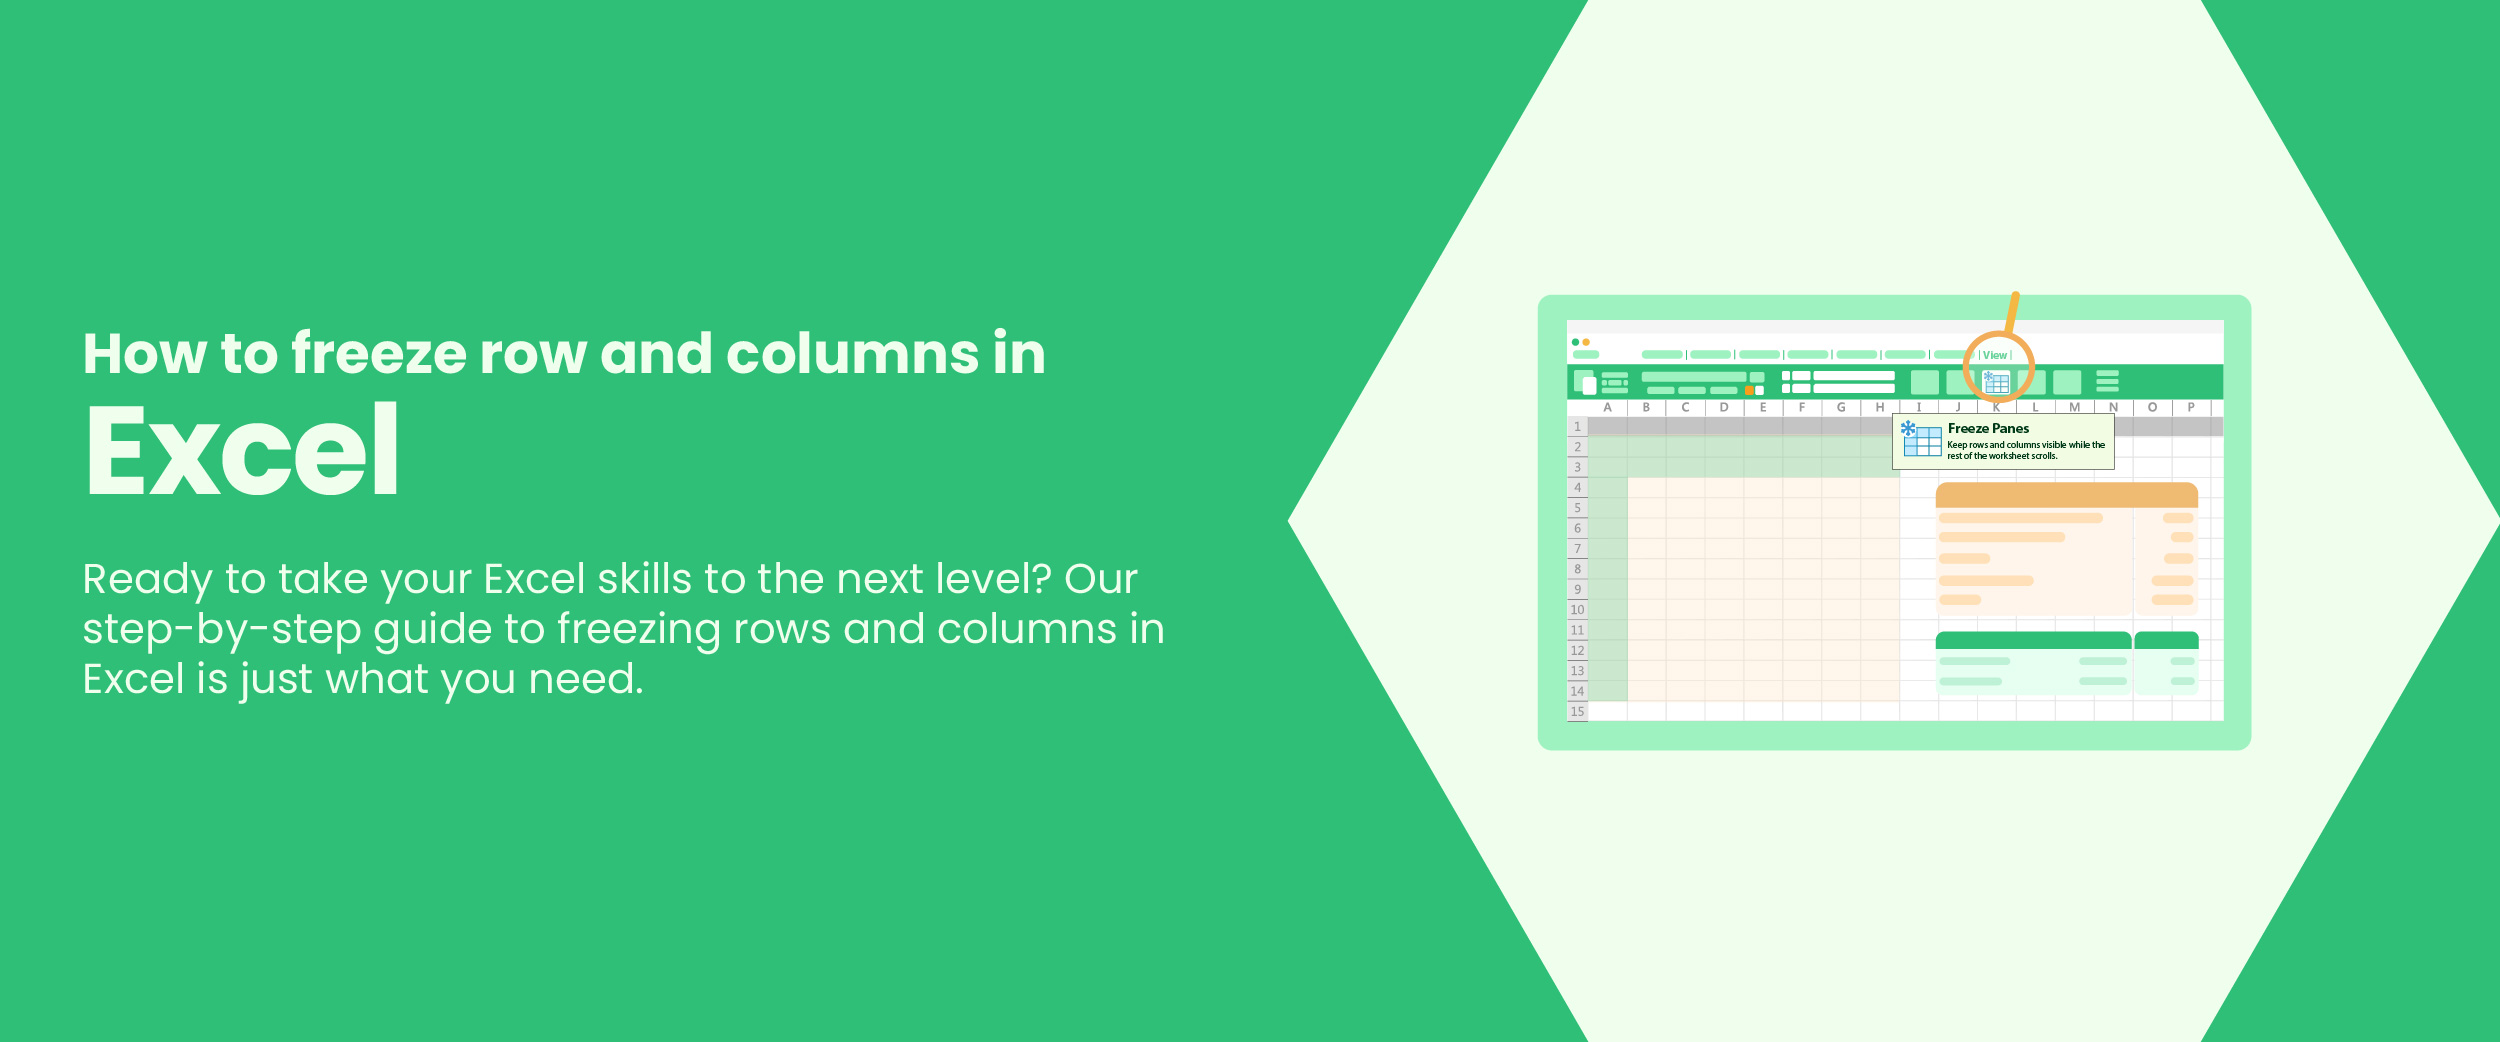 How to Freeze Columns and Rows in Excel